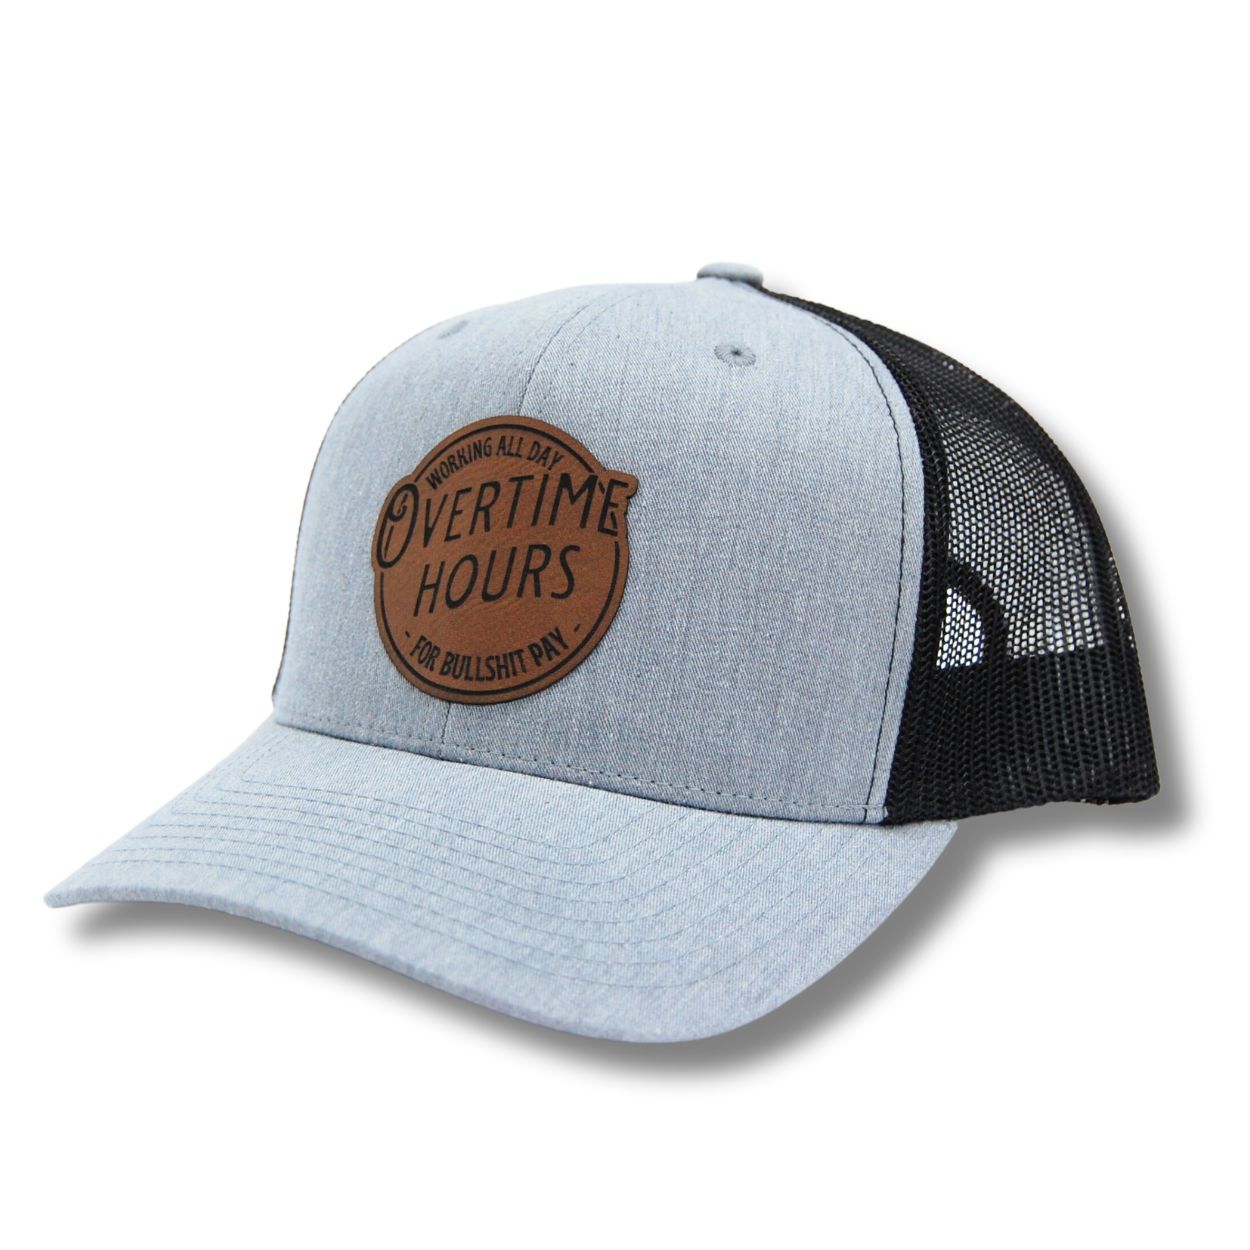 Oliver Anthony Hat - support Blue collar america blue collar apparel 